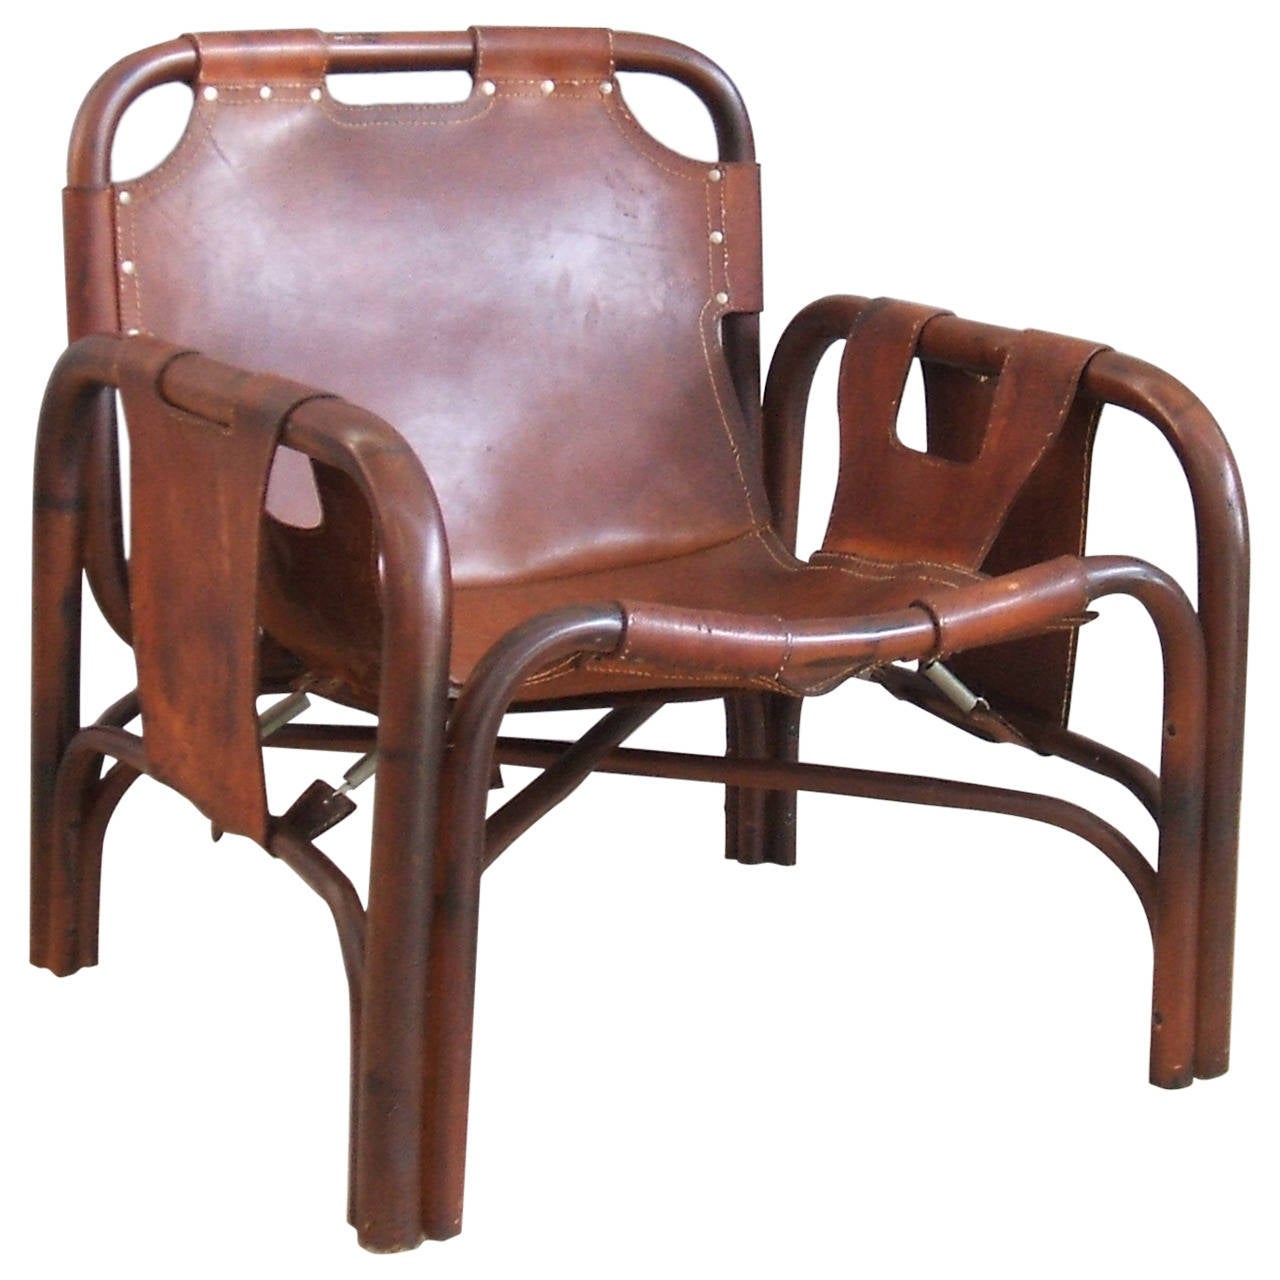 Arne Norell Style Safari Chair at 1stdibs